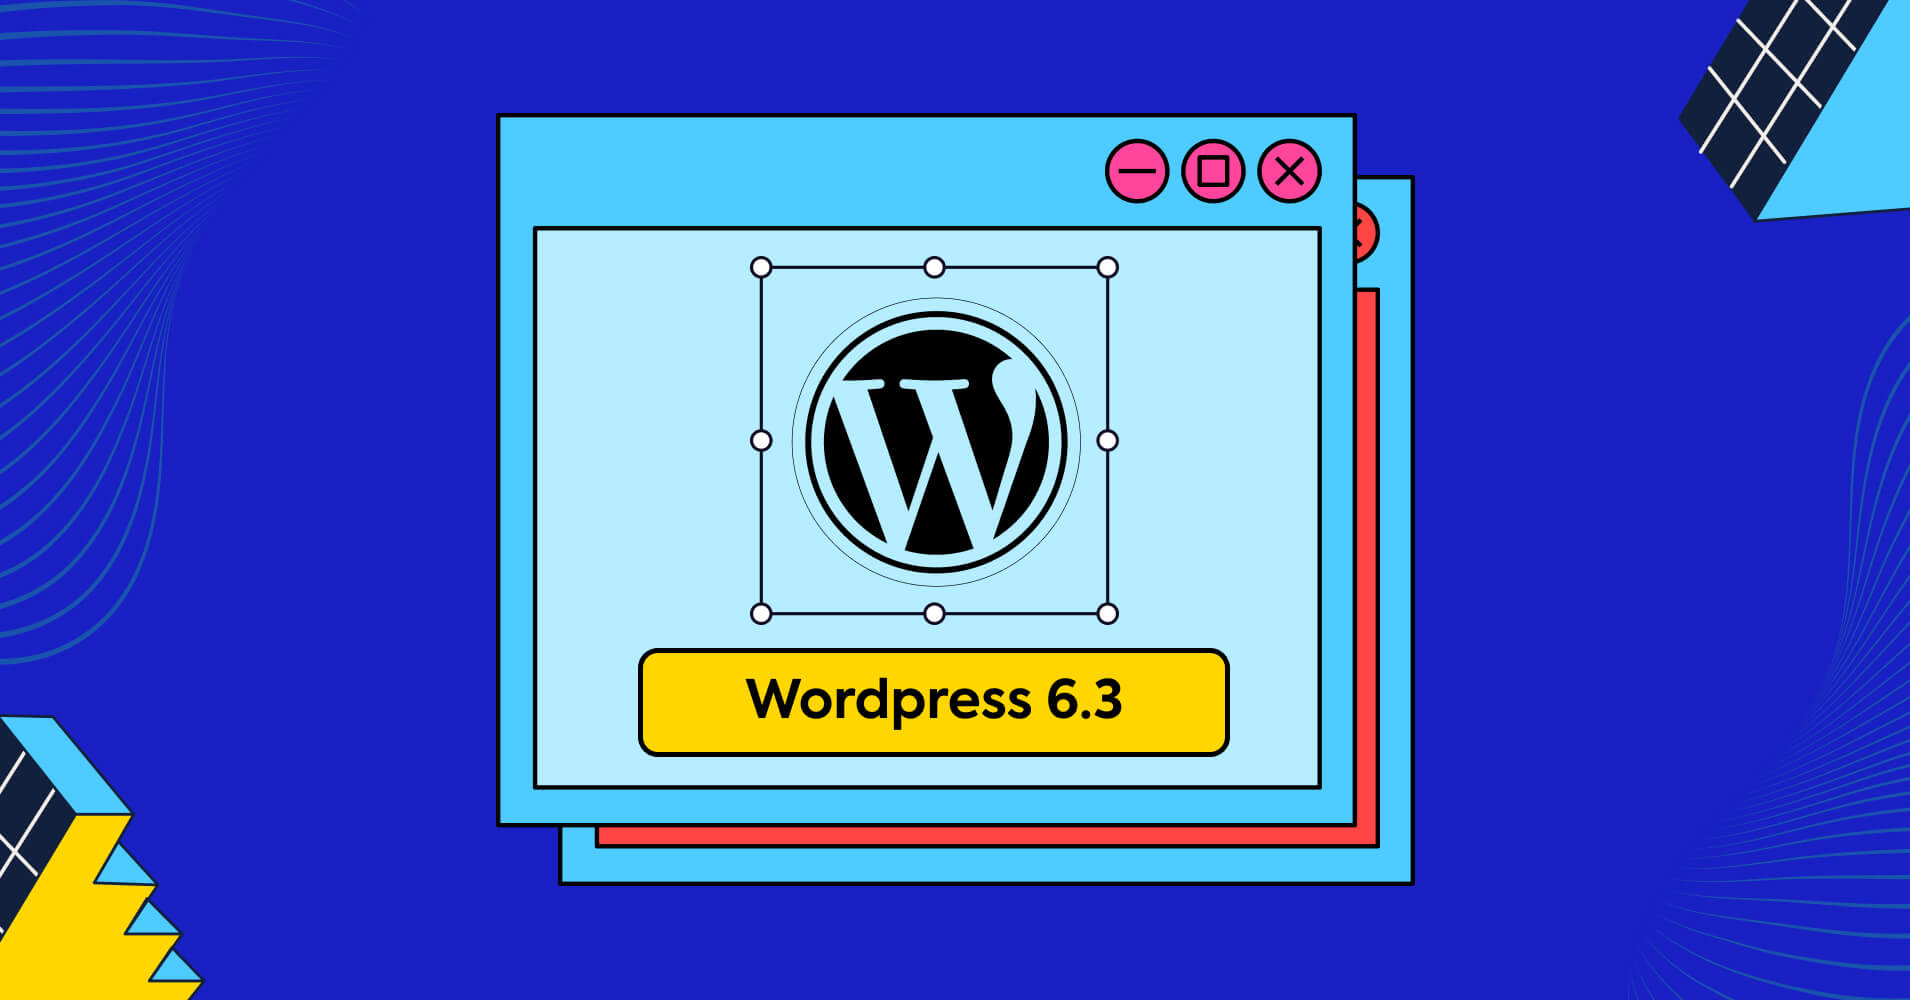 What’s Coming in WordPress 6.3?